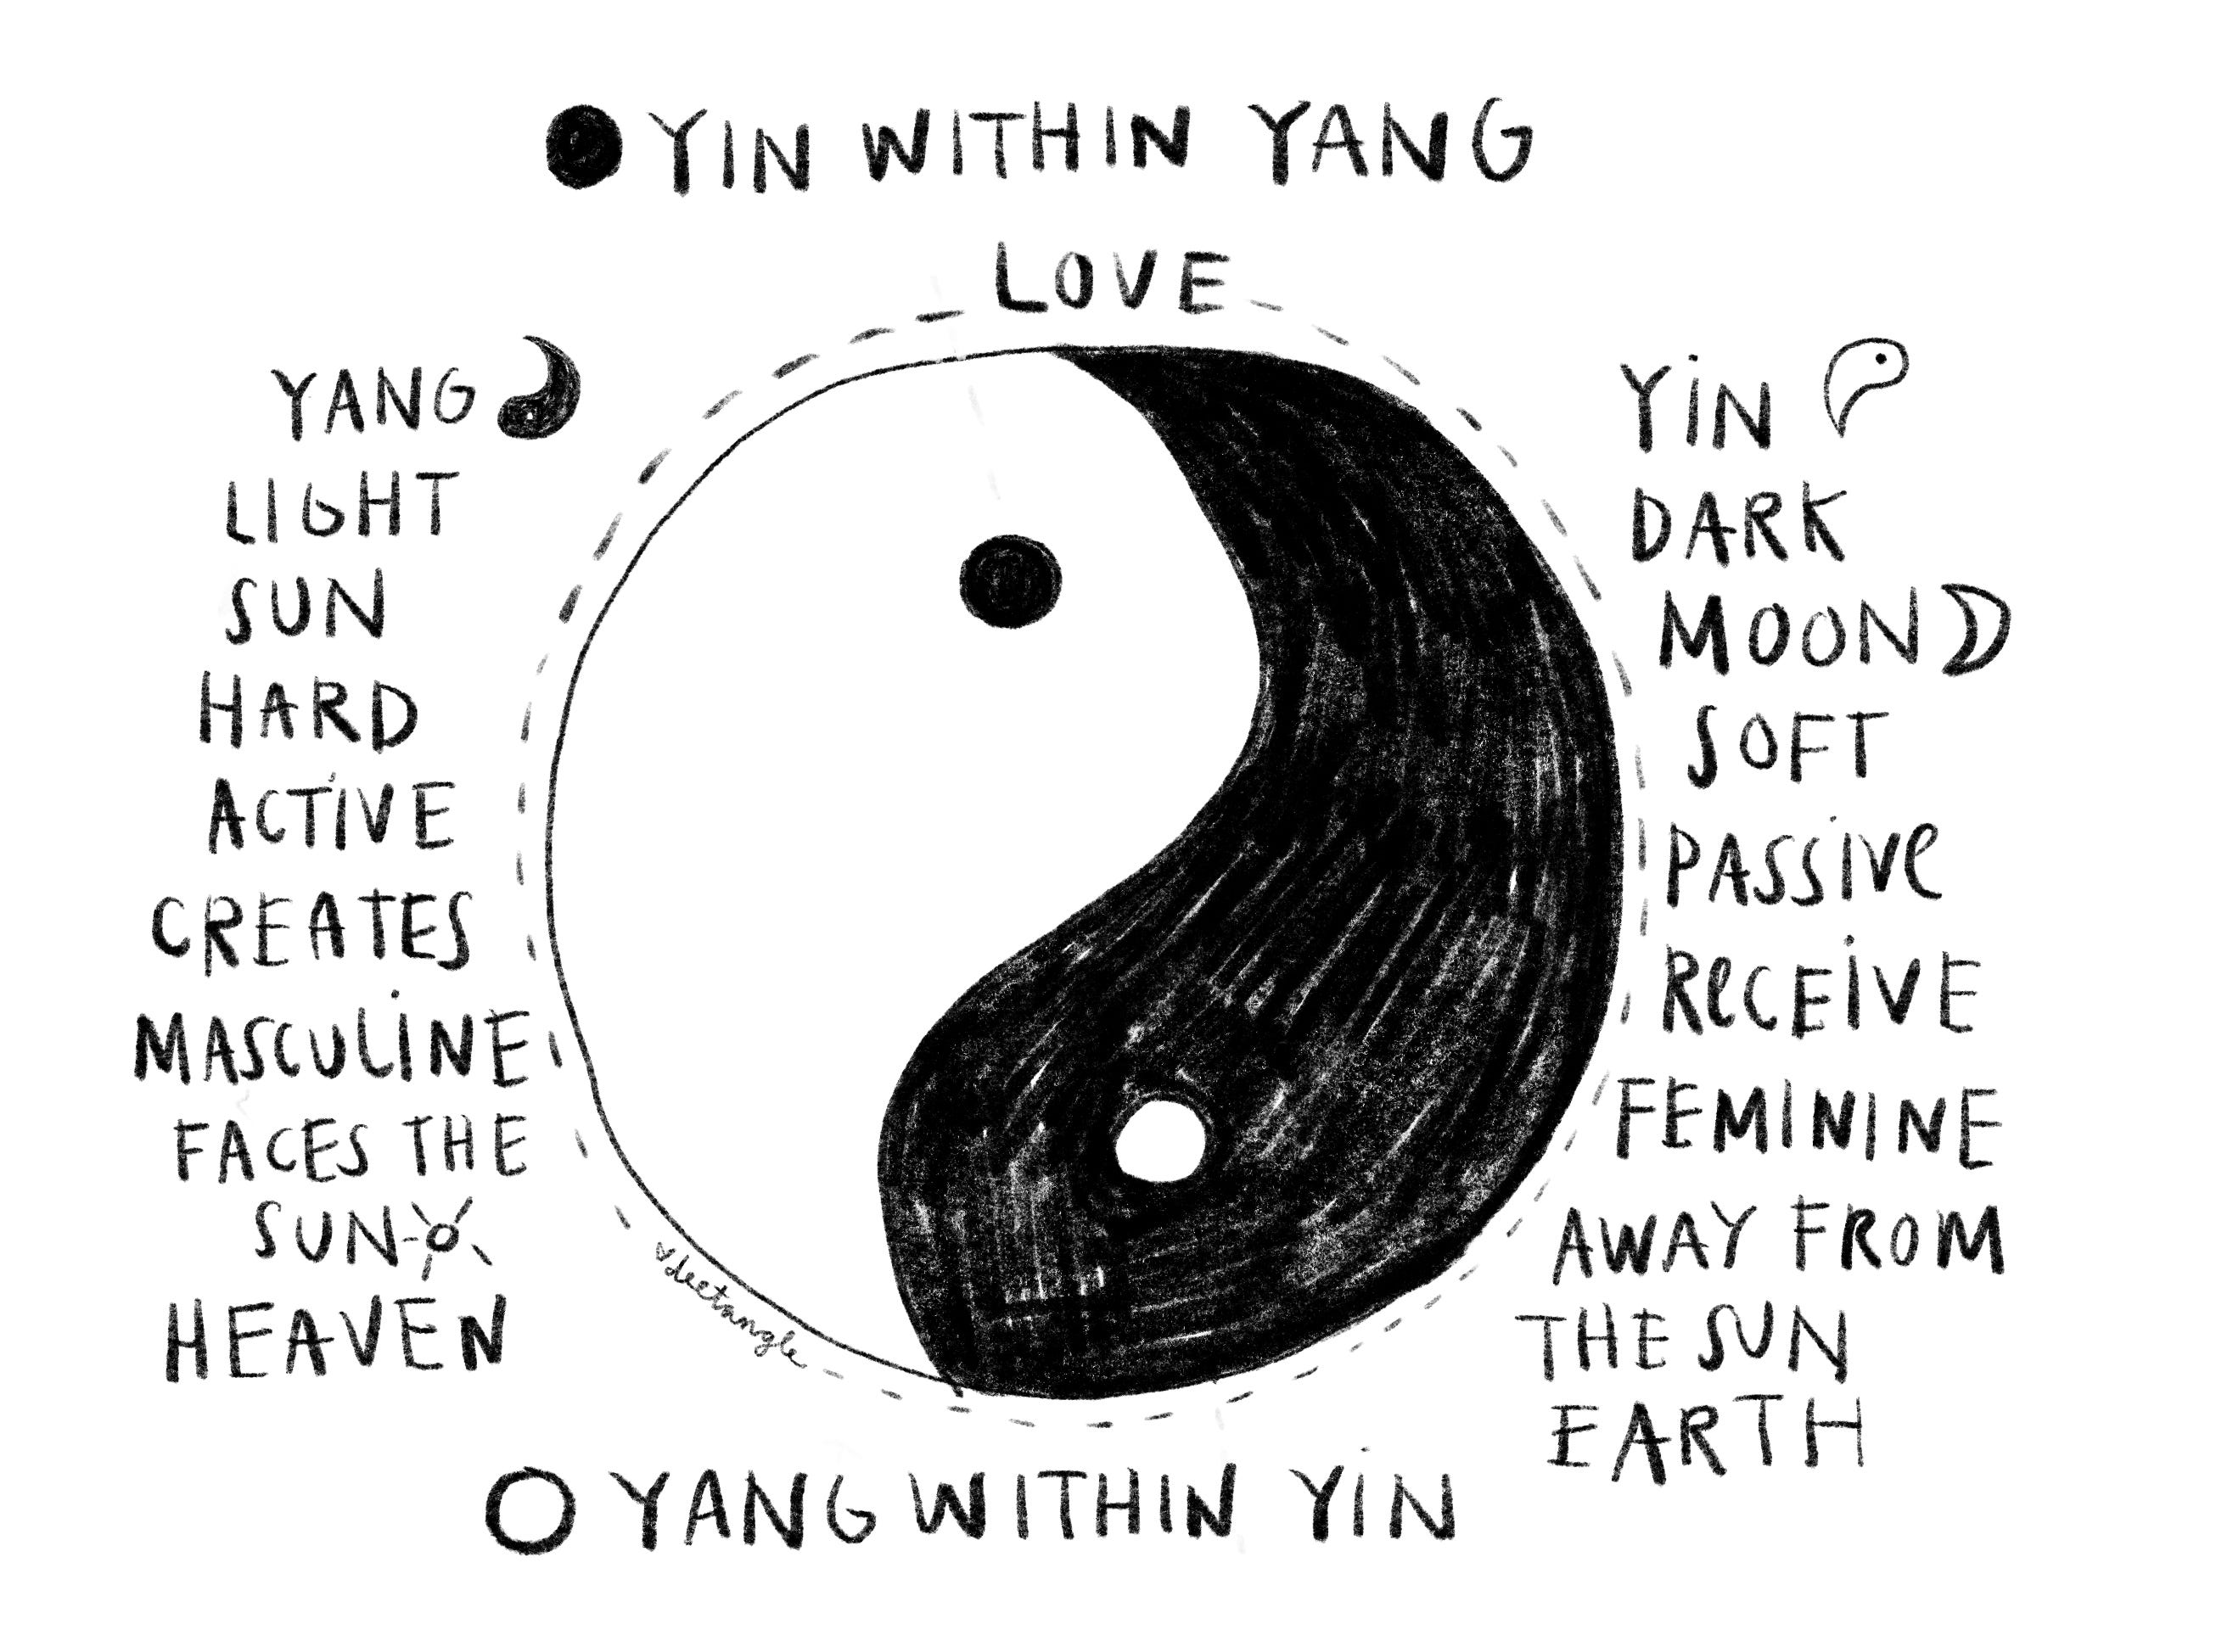 dear doris. what is the meaning of yin yang? why do i keep seeing